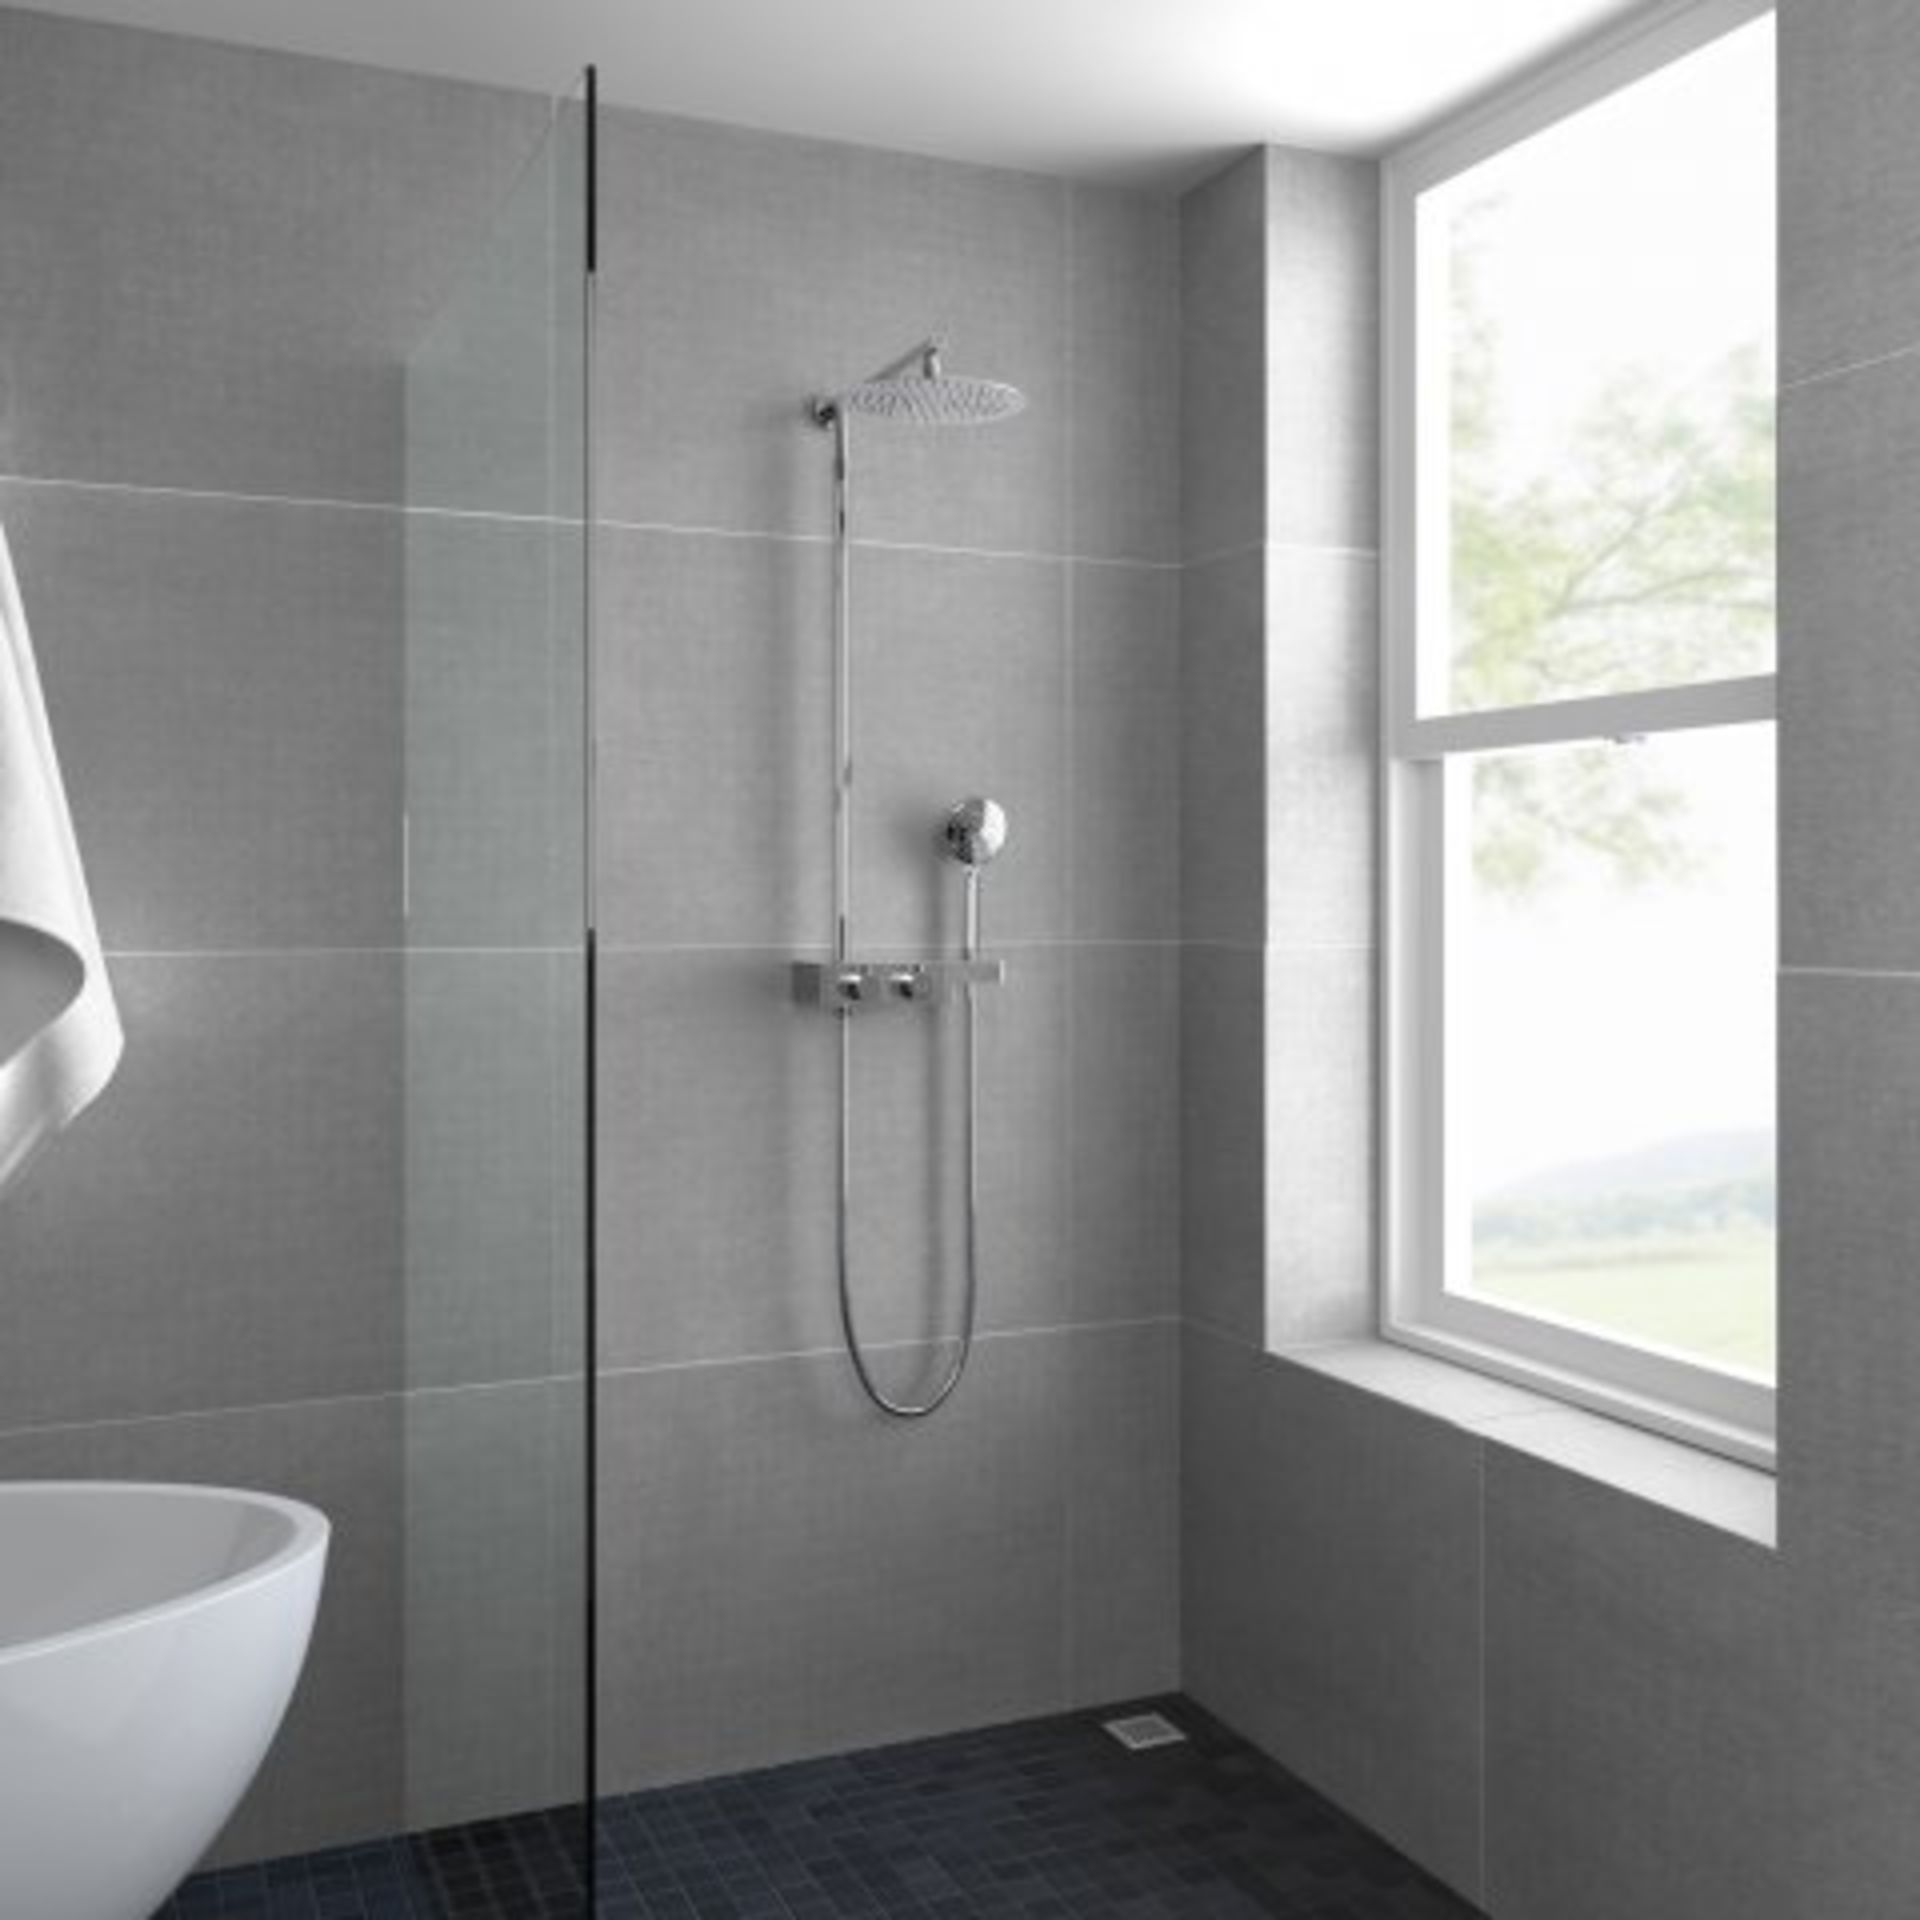 (I54) Round Exposed Thermostatic Mixer Shower Kit & Large Shower Head RRP £349.99 Designer Style Our - Image 3 of 6